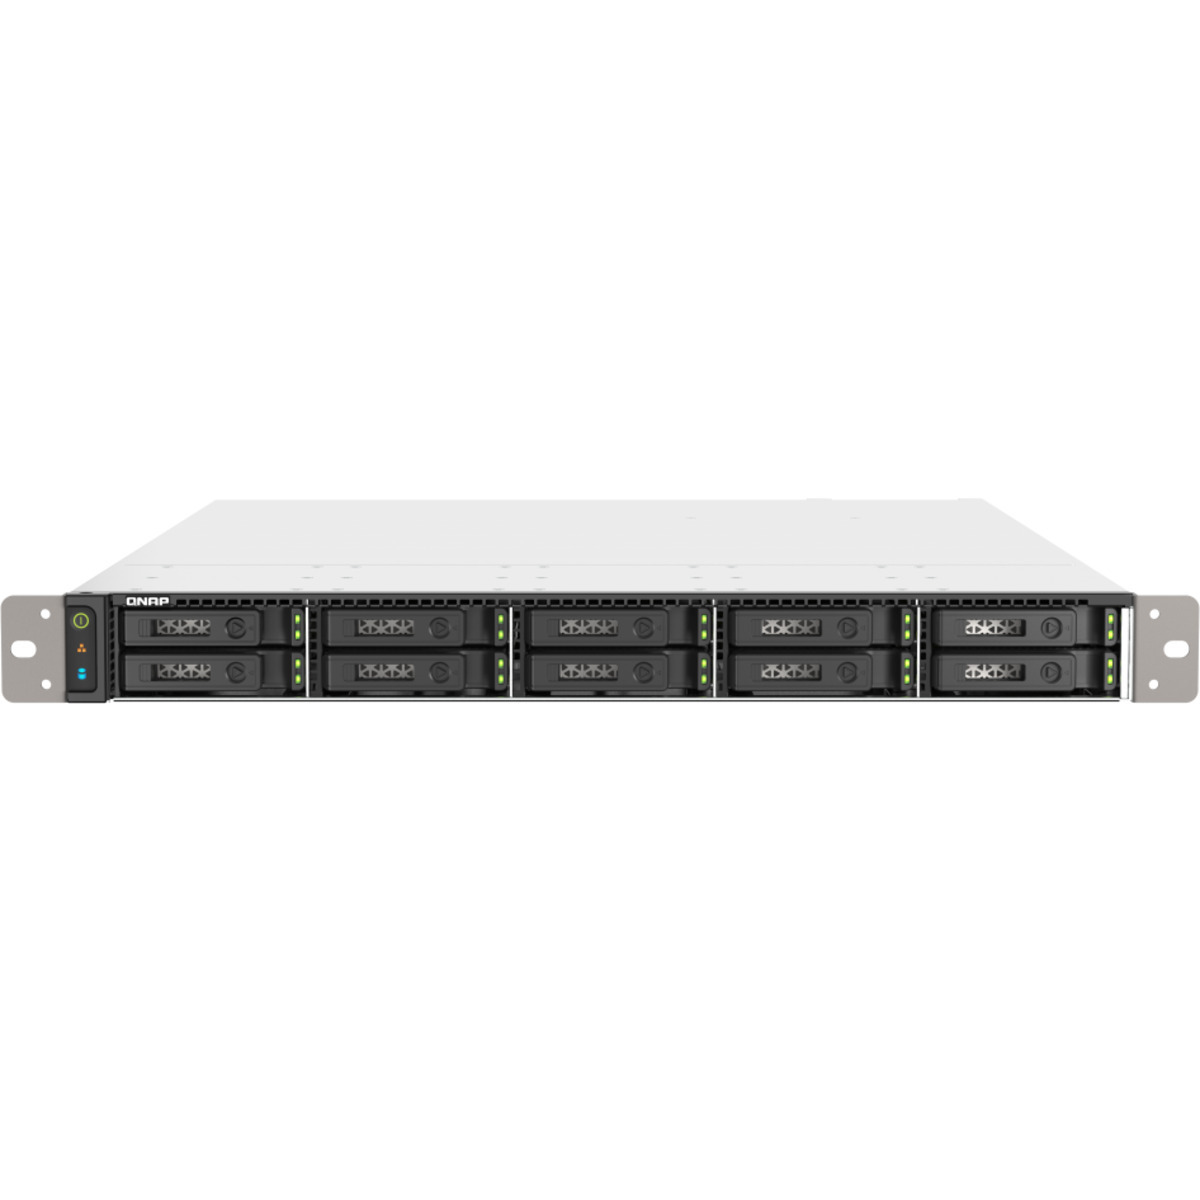 QNAP TS-h1090FU-7232P 16tb 10-Bay RackMount Large Business / Enterprise NAS - Network Attached Storage Device 8x2tb Sandisk Ultra 3D SDSSDH3-2T00 2.5 560/520MB/s SATA 6Gb/s SSD CONSUMER Class Drives Installed - Burn-In Tested TS-h1090FU-7232P